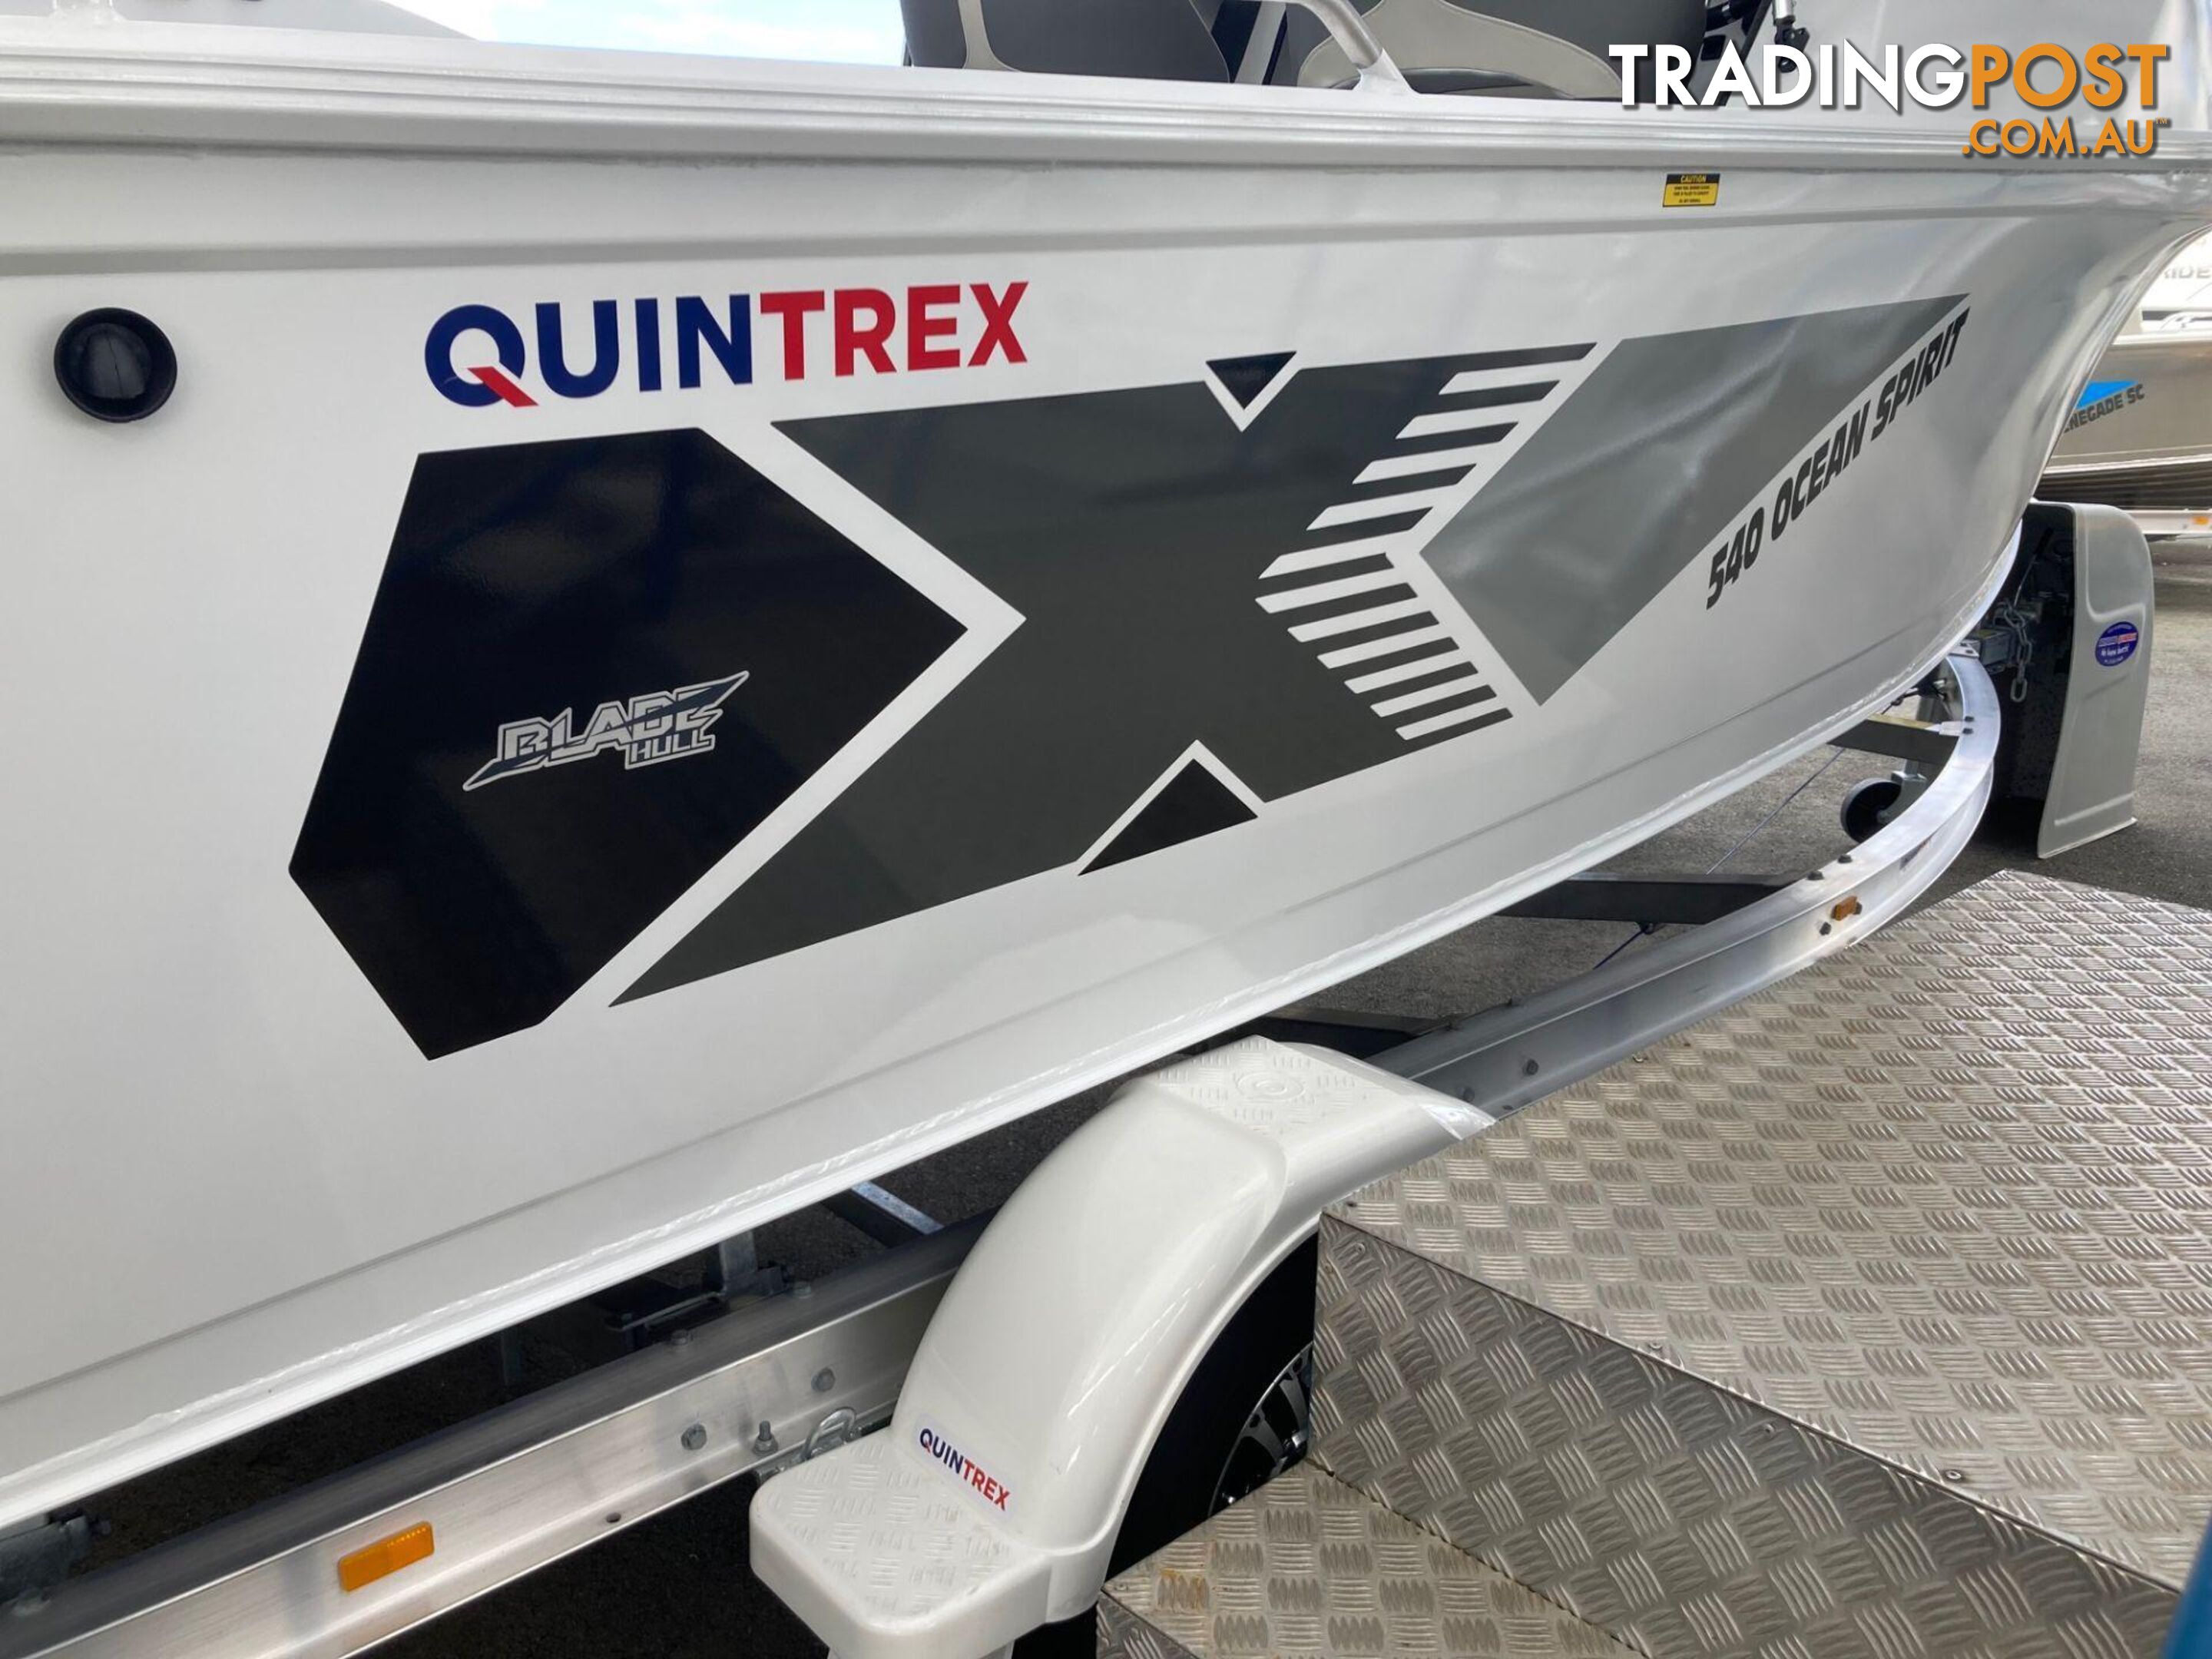 In Stock Now !  This Quintrex 540 OCEAN SPIRIT Our Stock Boat Package F130 Hp